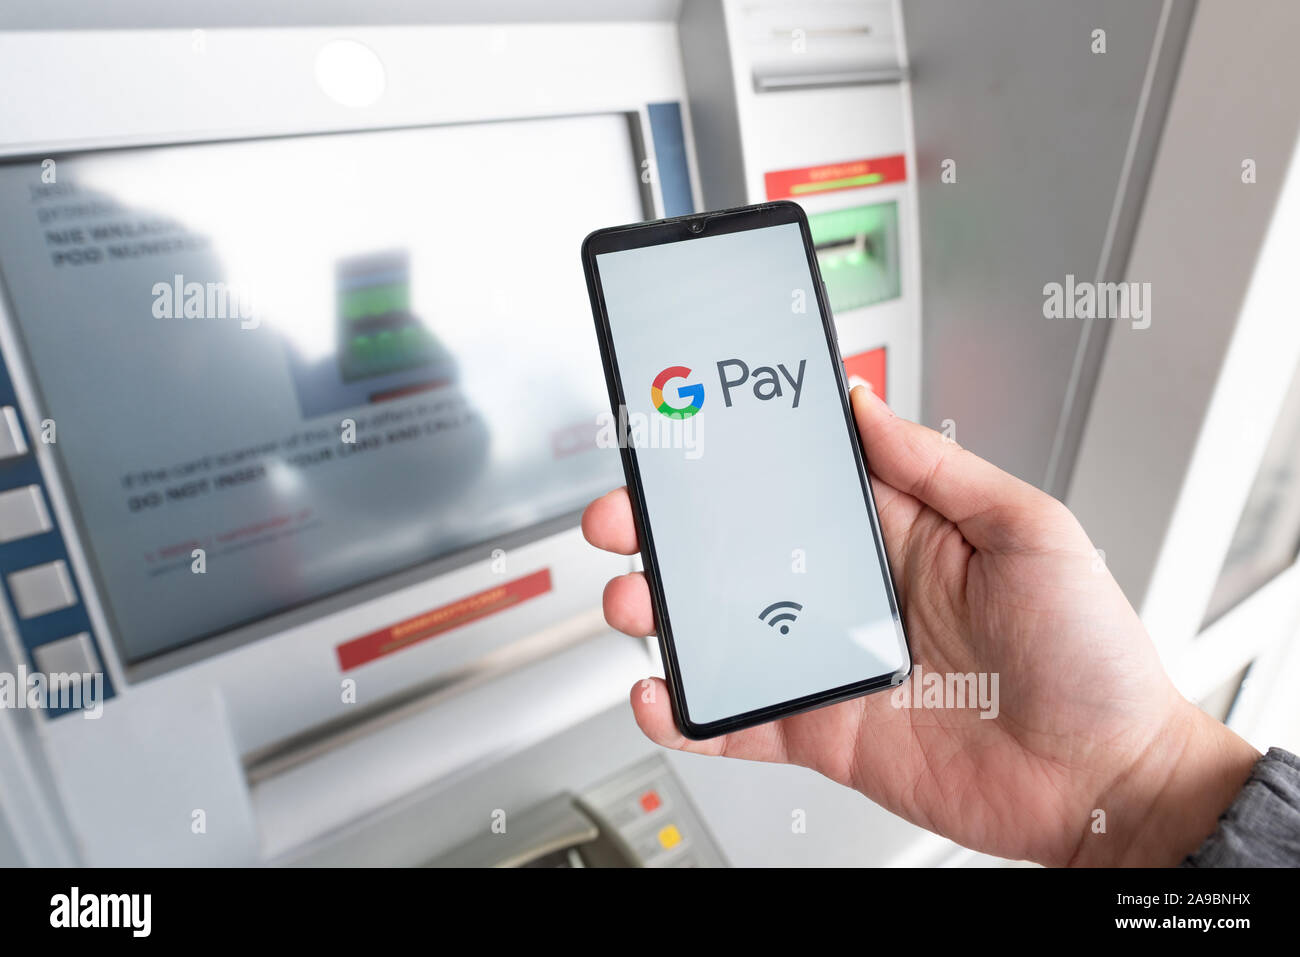 Wroclaw, Poland - NOV 06, 2019: Man holding smartphone with Google Pay logo. Google Pay is electronic wallet developed by Google. Stock Photo